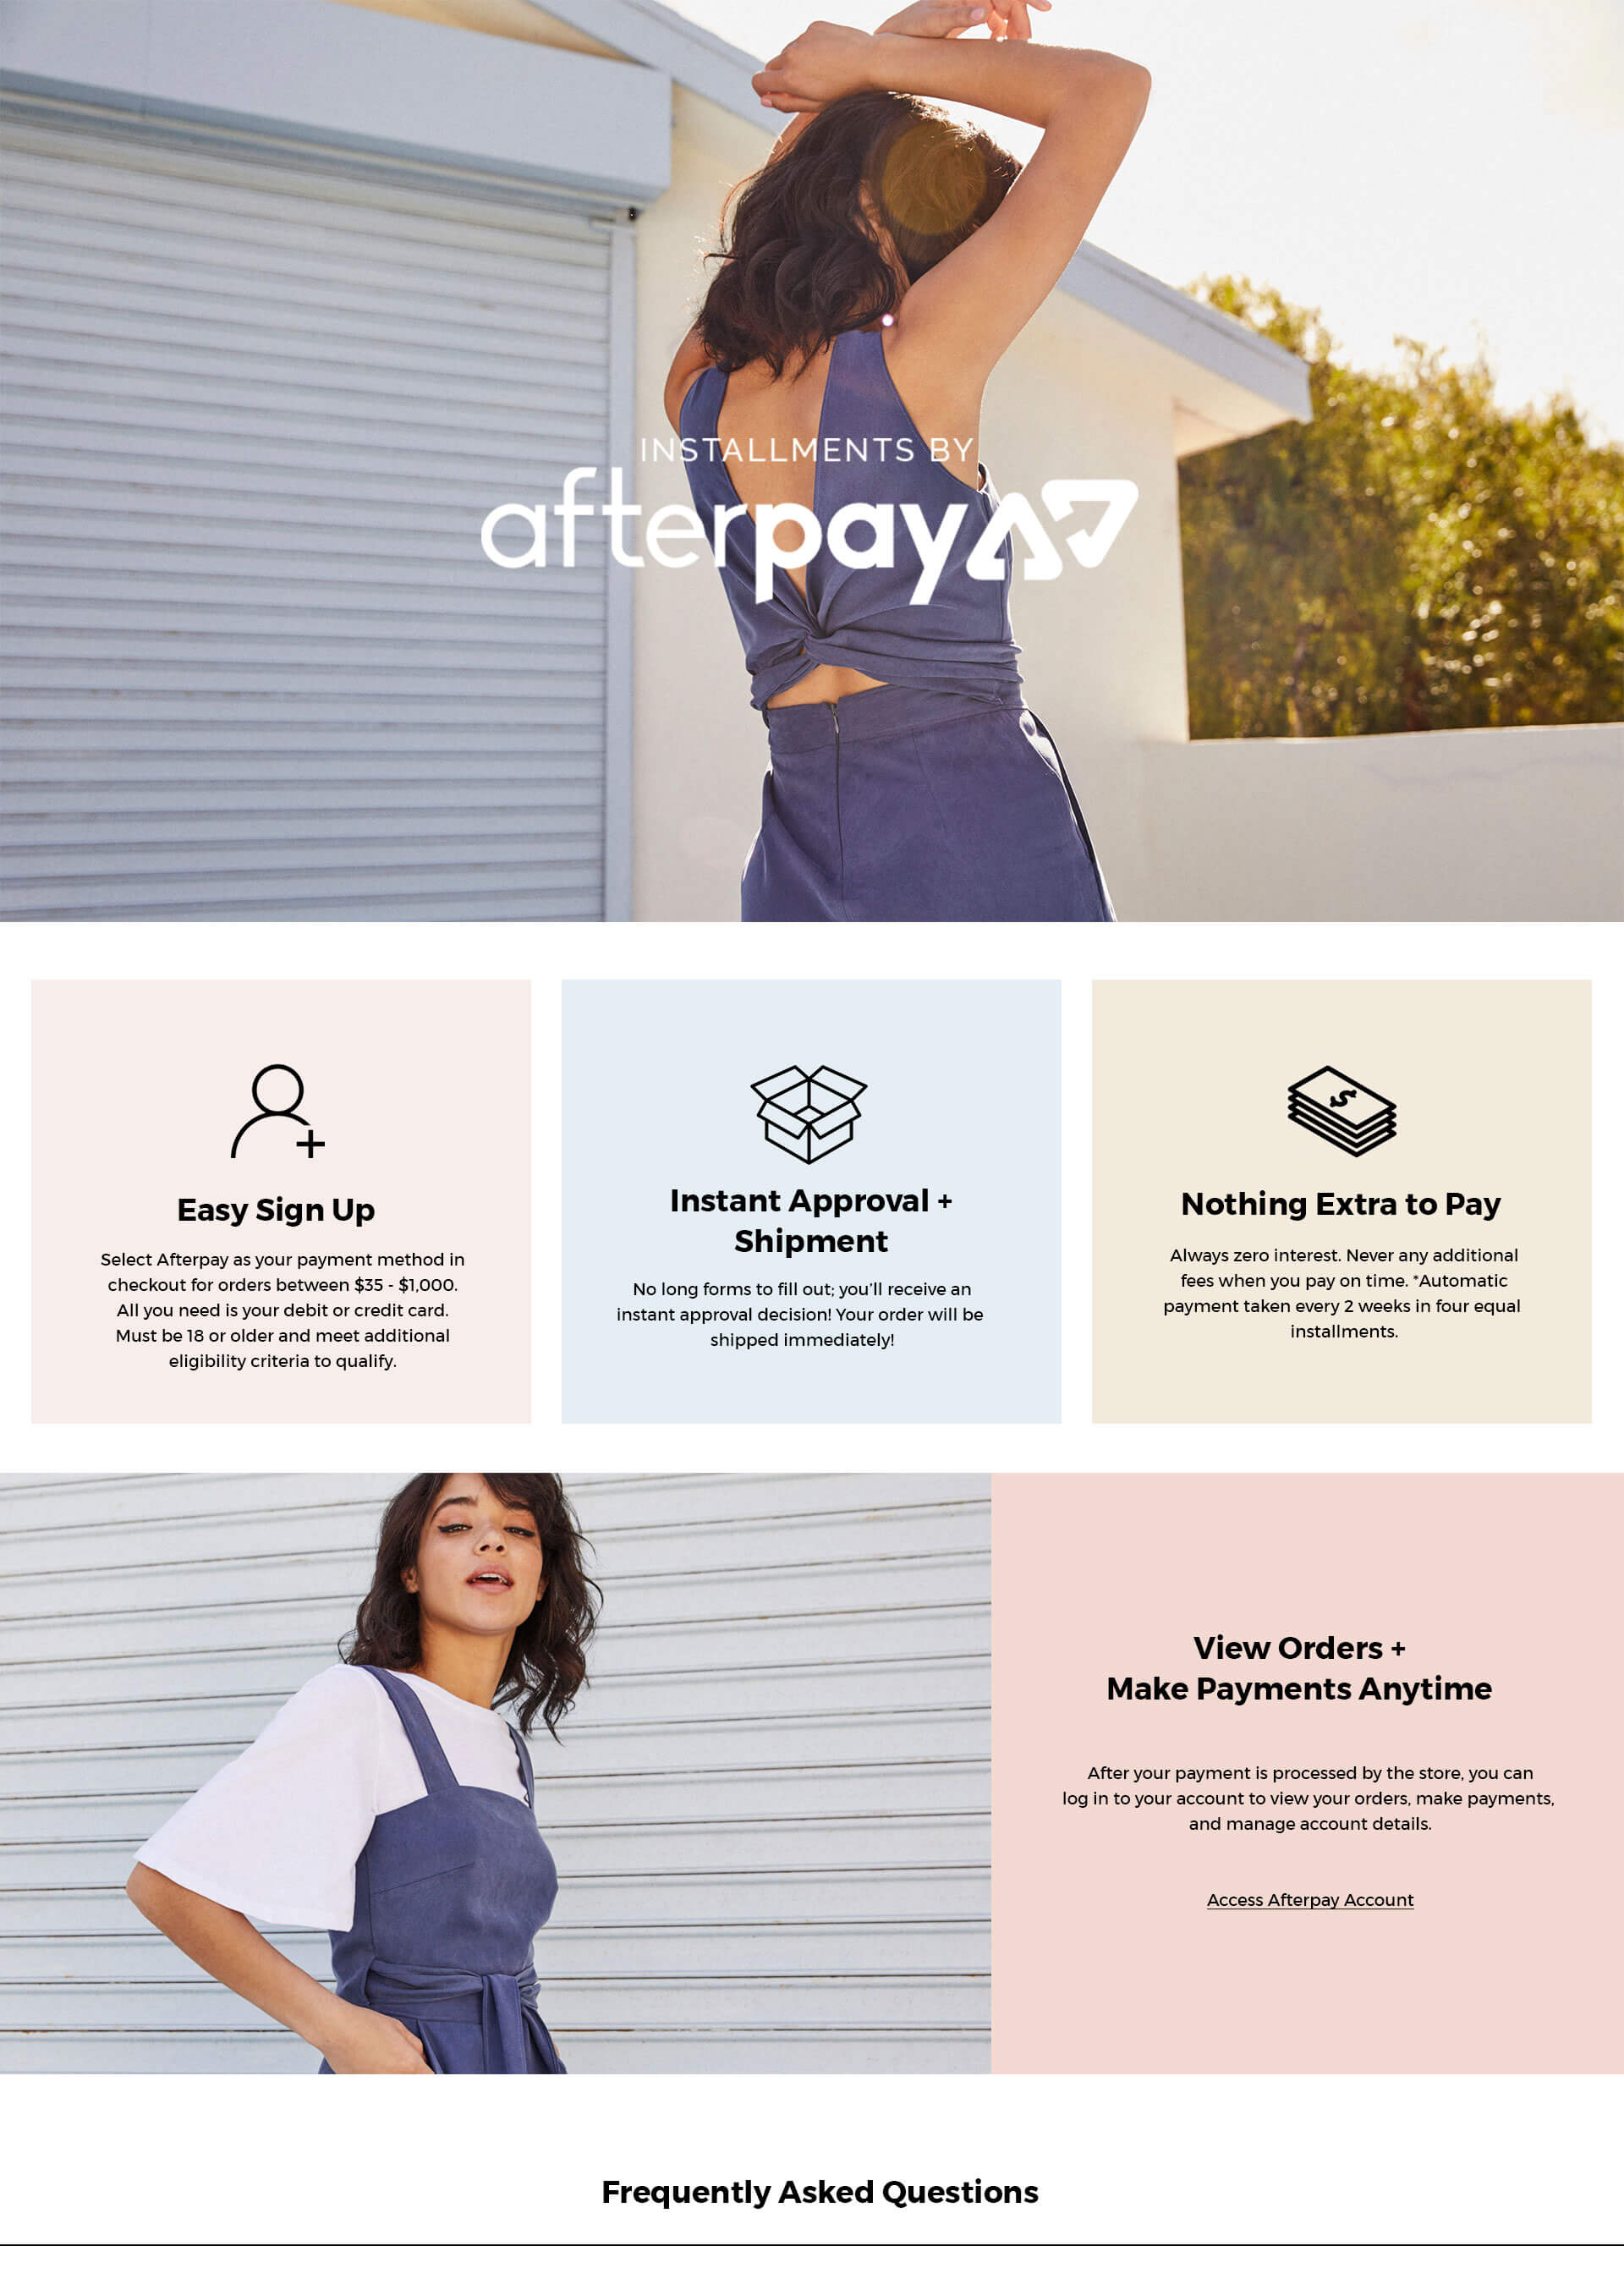 How Does Afterpay Work? Understanding Afterpay